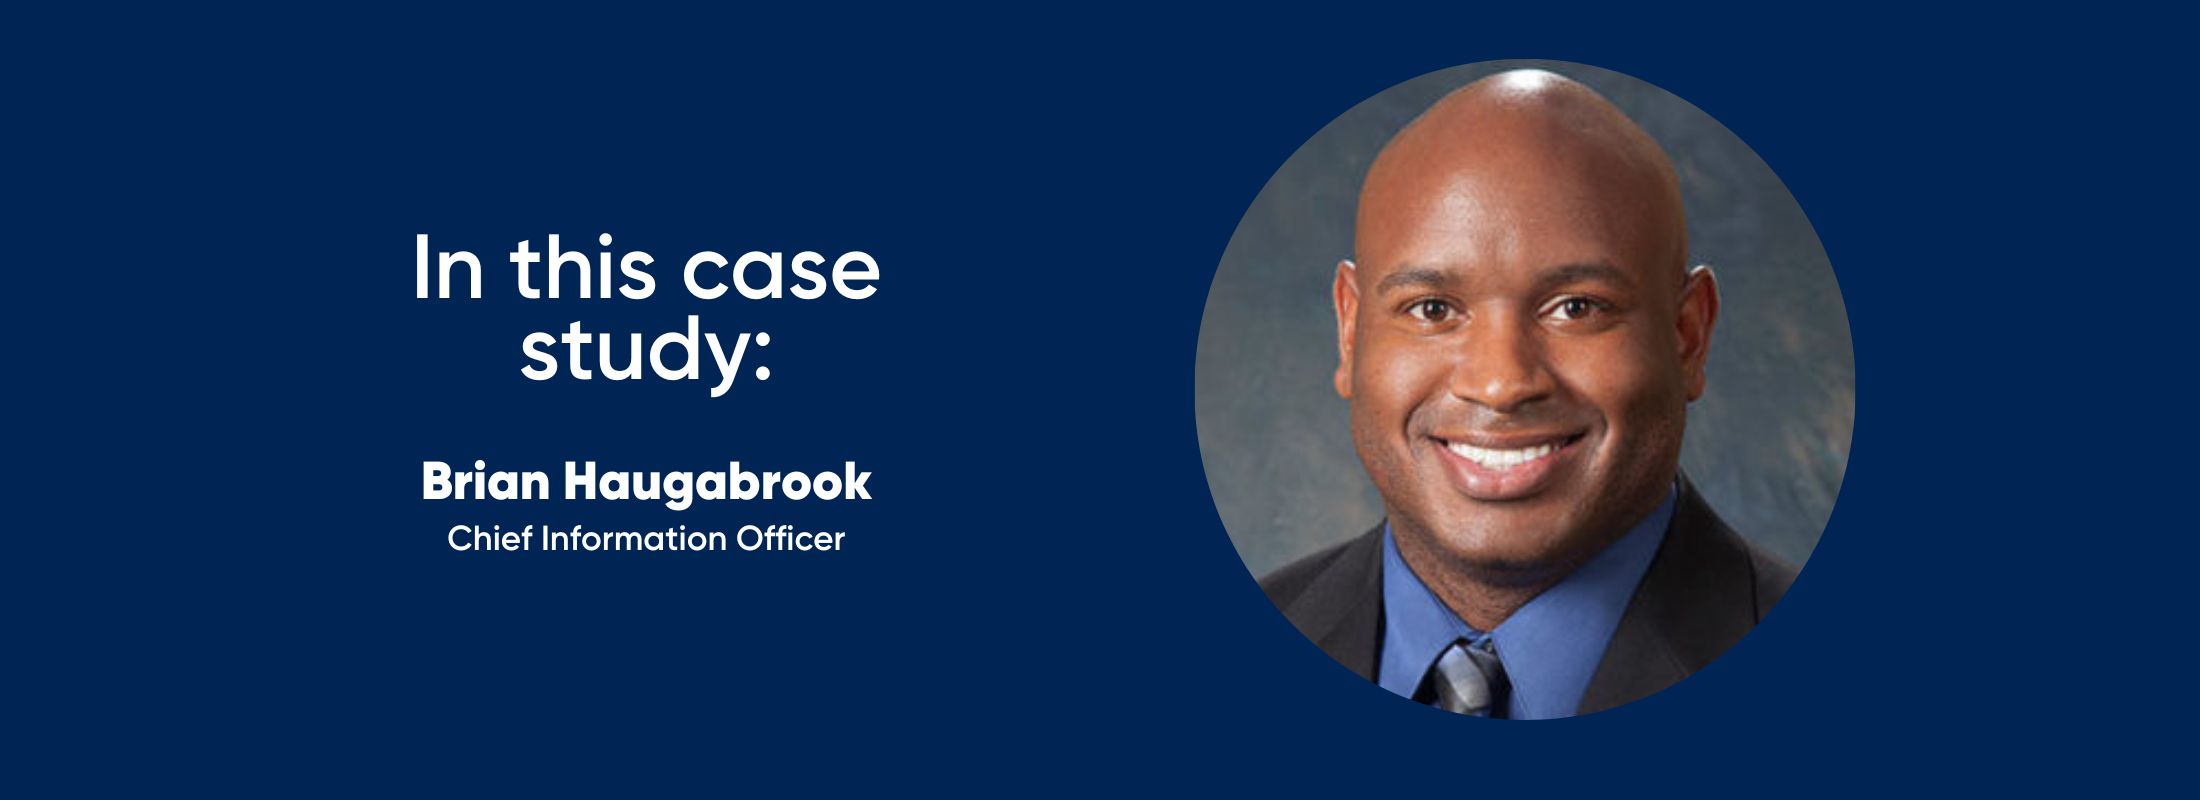 in this case study: Brian Haugabrook, Chief Information Officer